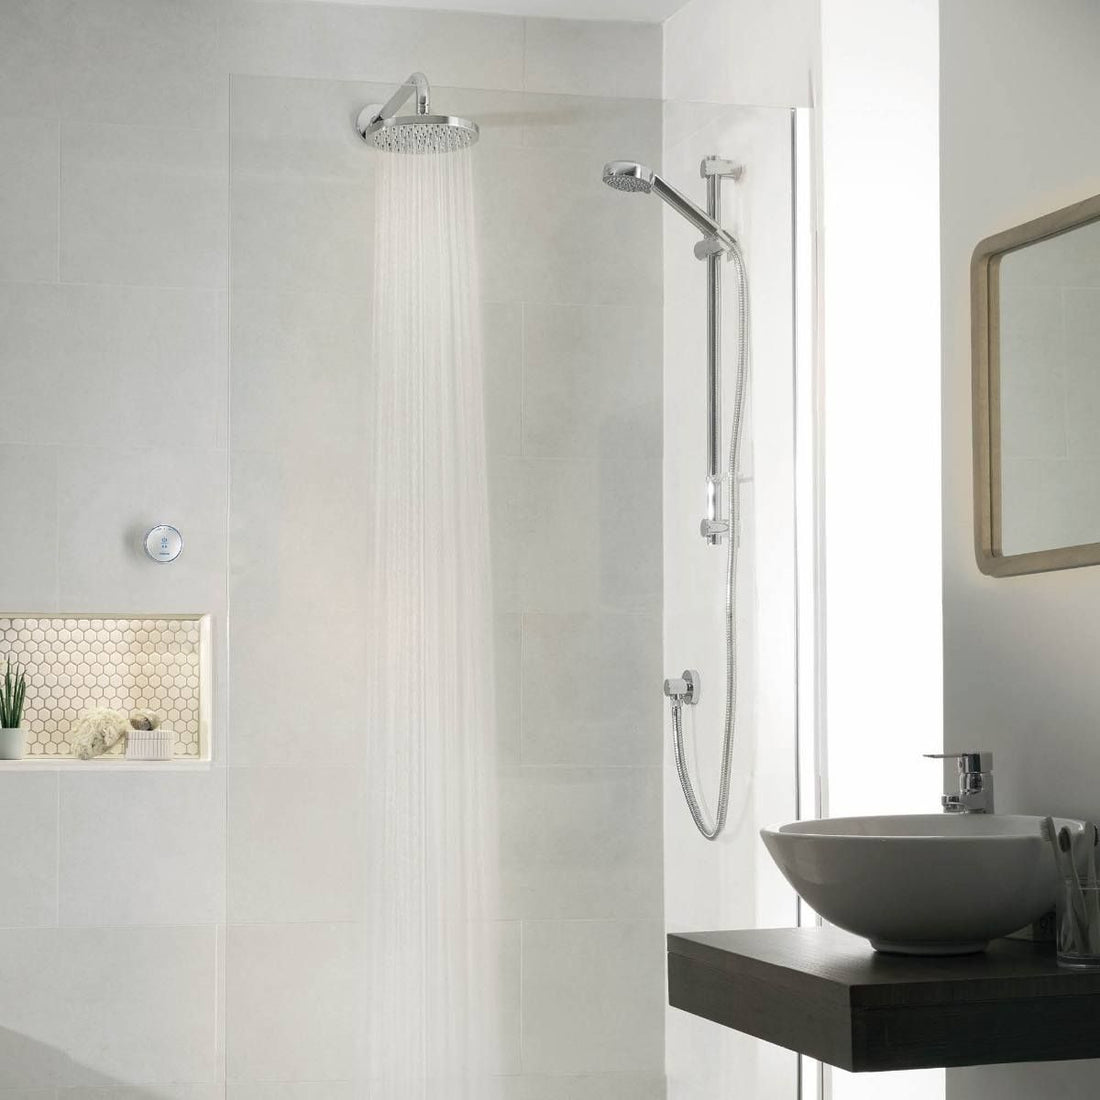 Aqualisa Quartz Blue Smart Shower - Concealed With Adjustable &amp; Wall Fixed Head against white wall panel QZSB.A1.BV.DVFW.20